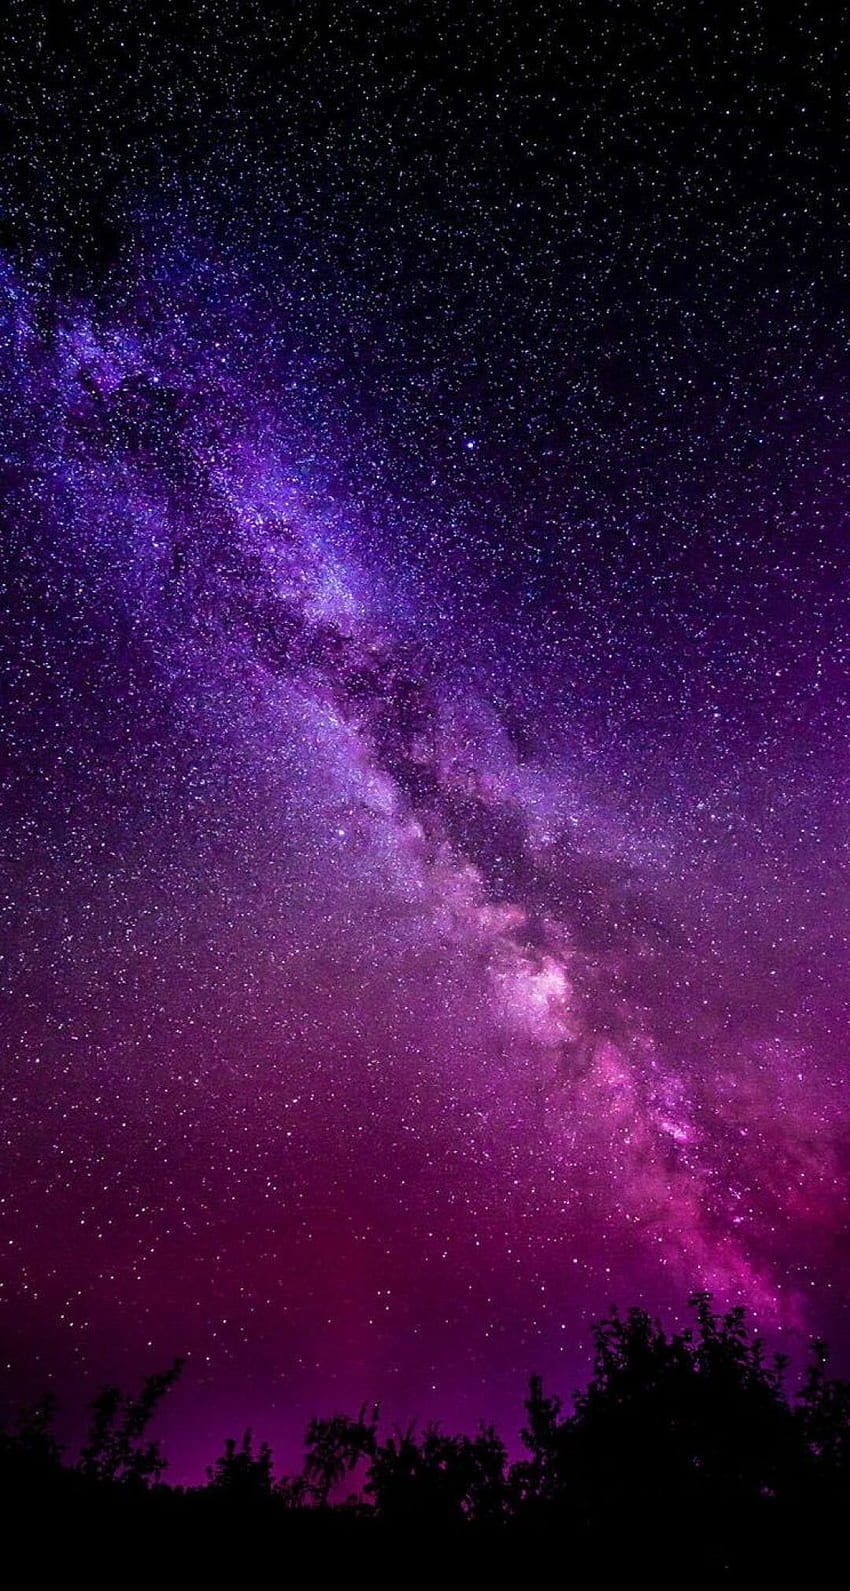 85 Milky Way Galaxy - The iPhone - Android / iPhone 배경화면 (png / jpg) (2022), Milky Way iPhone HD 전화 배경 화면